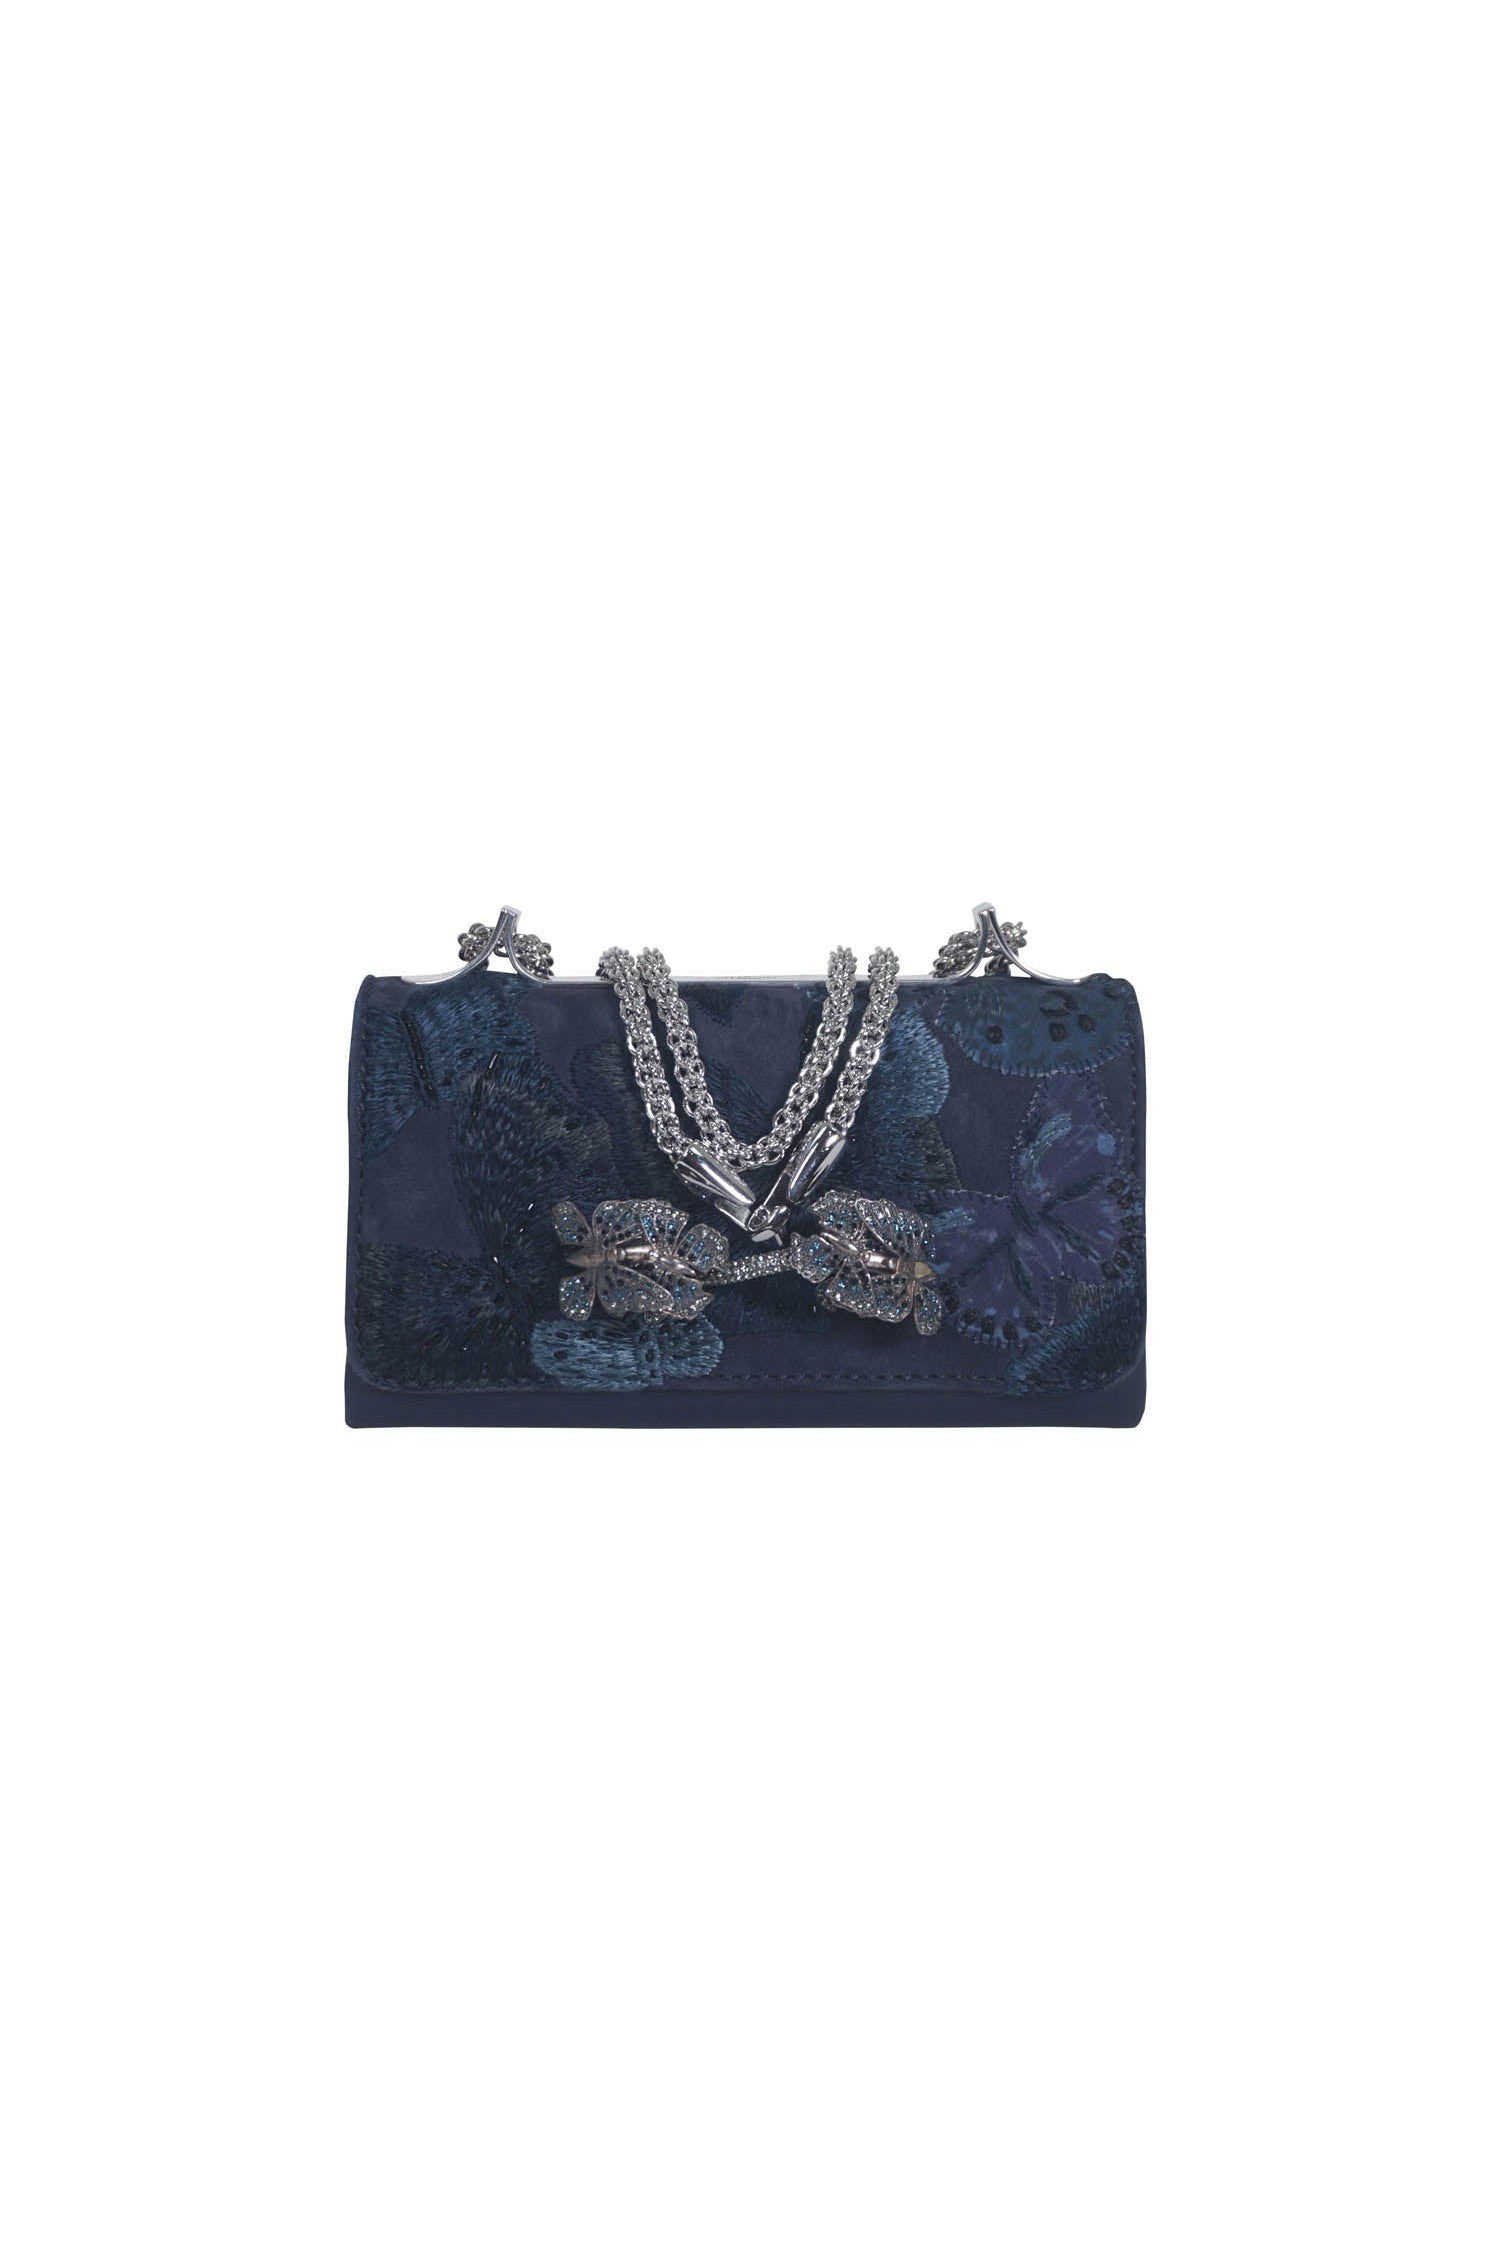 Valentino Navy Embellished Butterfly Knuckle Bag - Foxy Couture Carmel